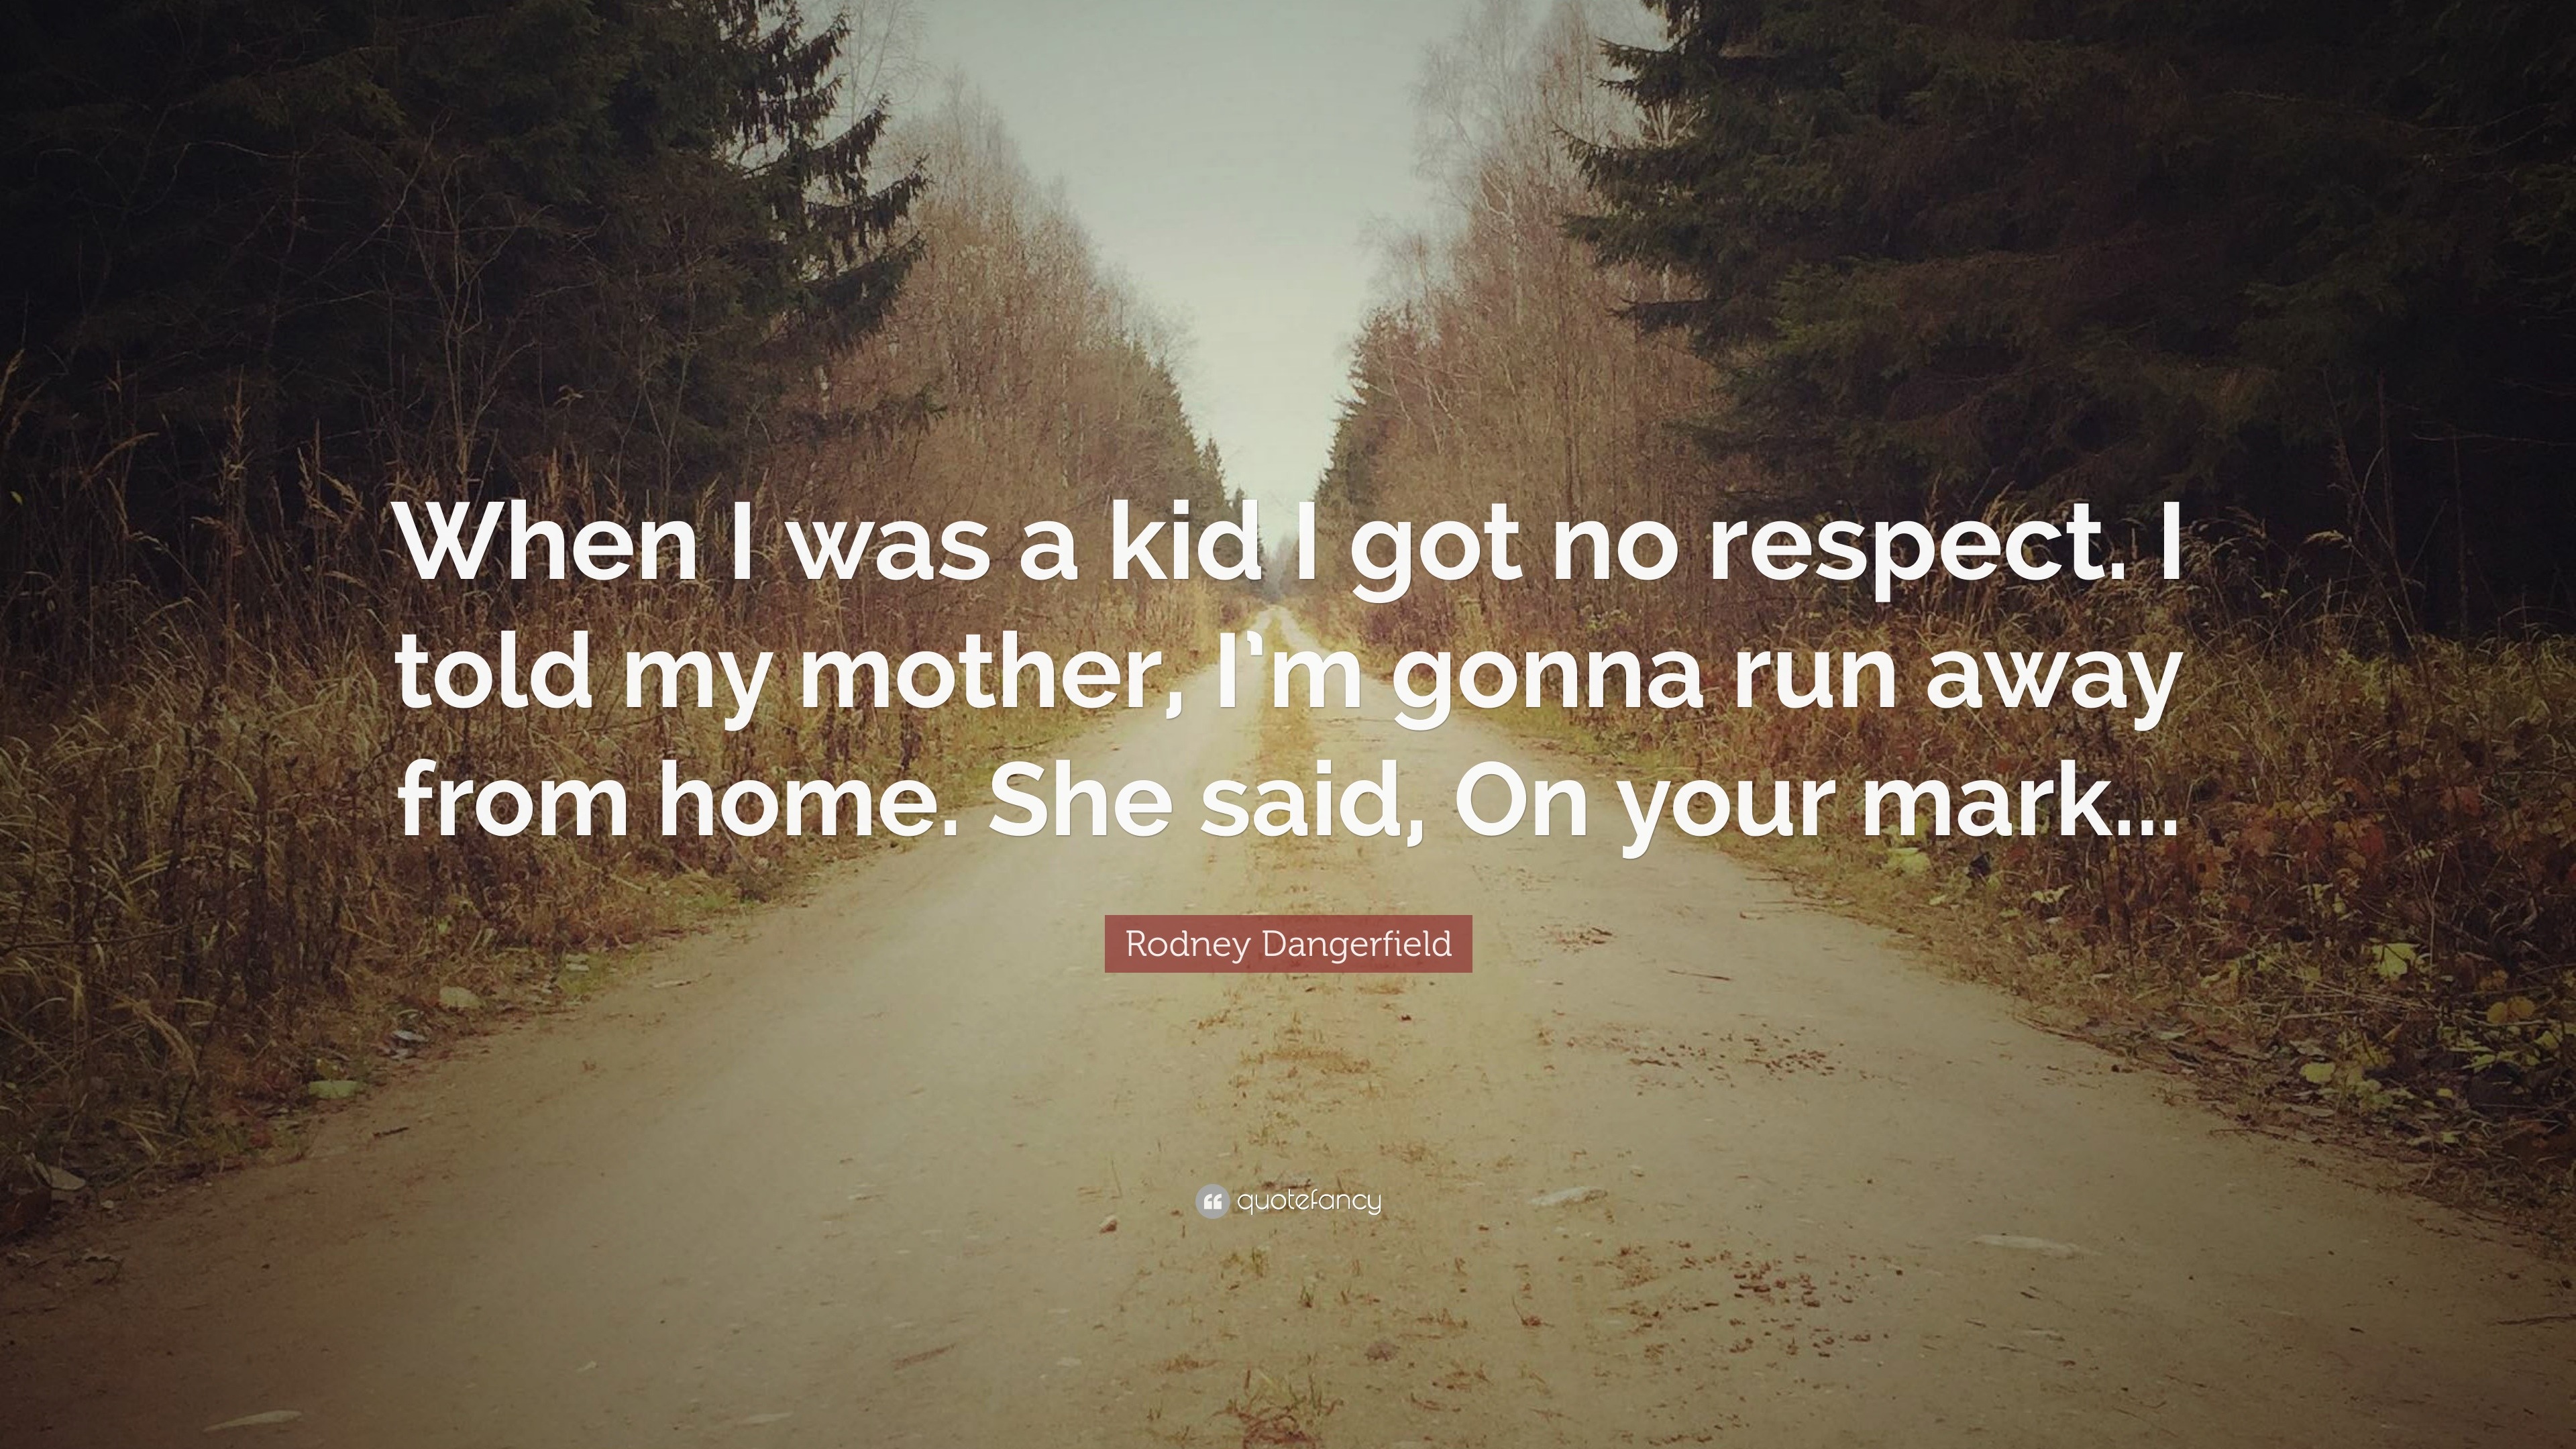 Rodney Dangerfield Quote: "When I was a kid I got no respect. I told my mother, I'm gonna run ...